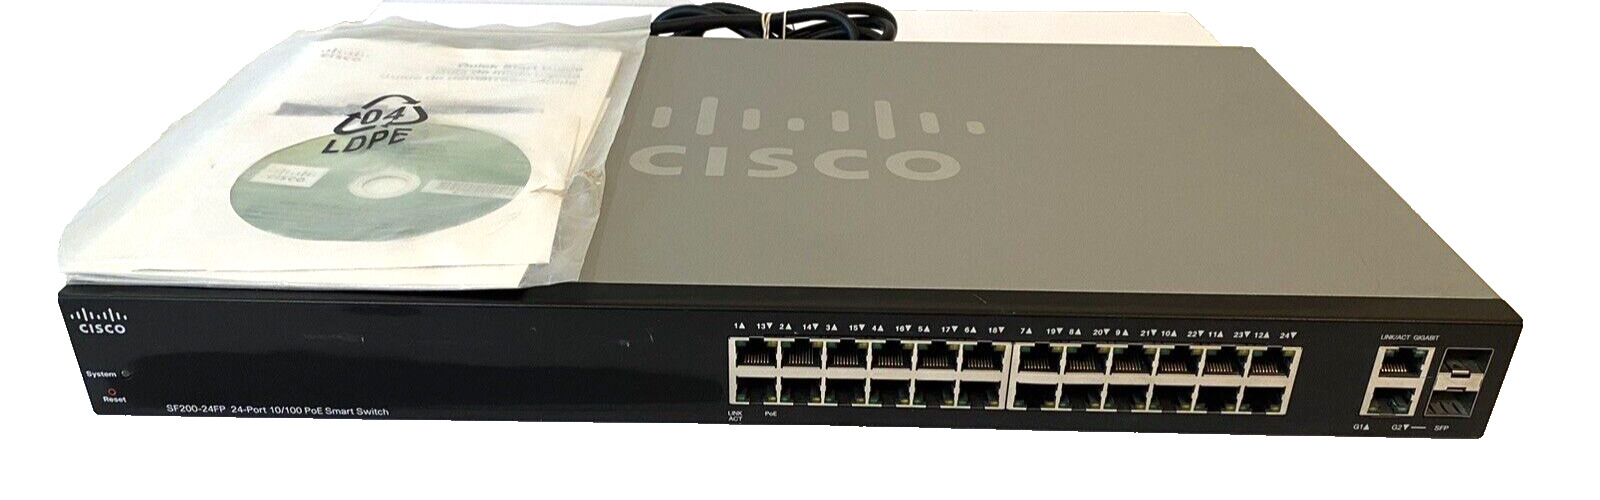 Cisco 24-Port Gigabit PoE+ Managed Switch SF300-24P With Manual And CD